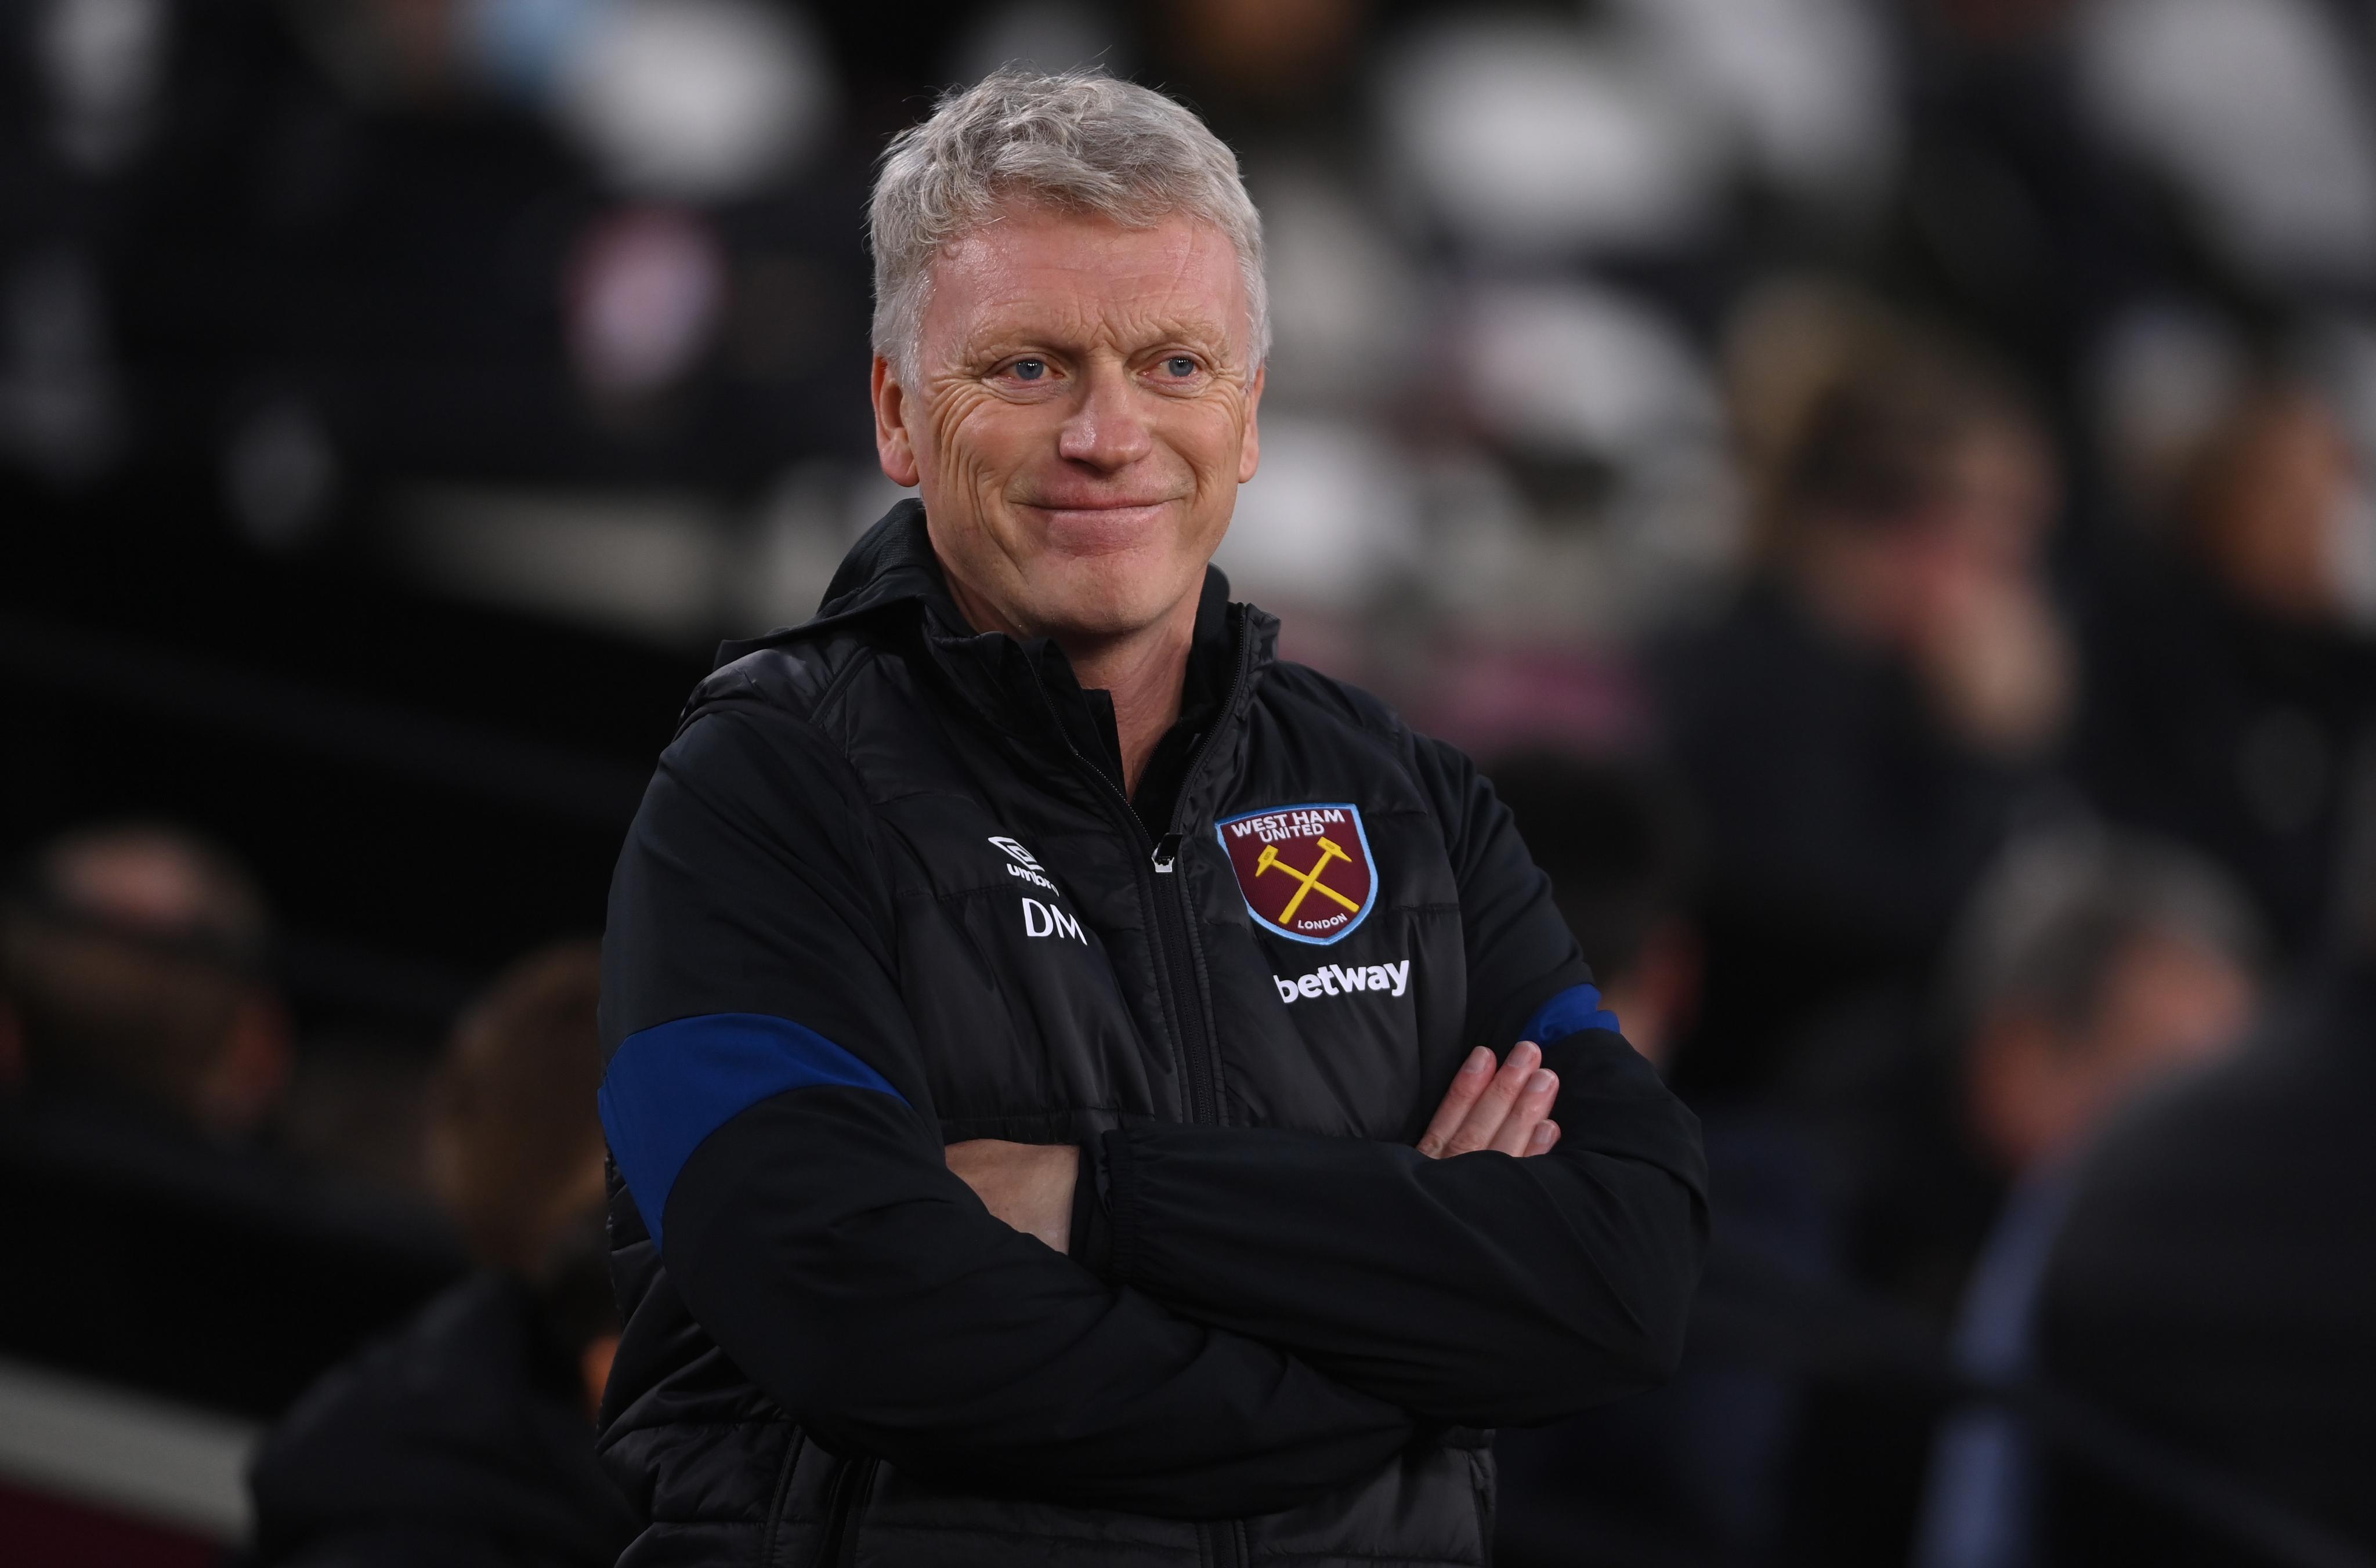 At Manchester United, I think I needed a chance to grow into it, reveals David Moyes